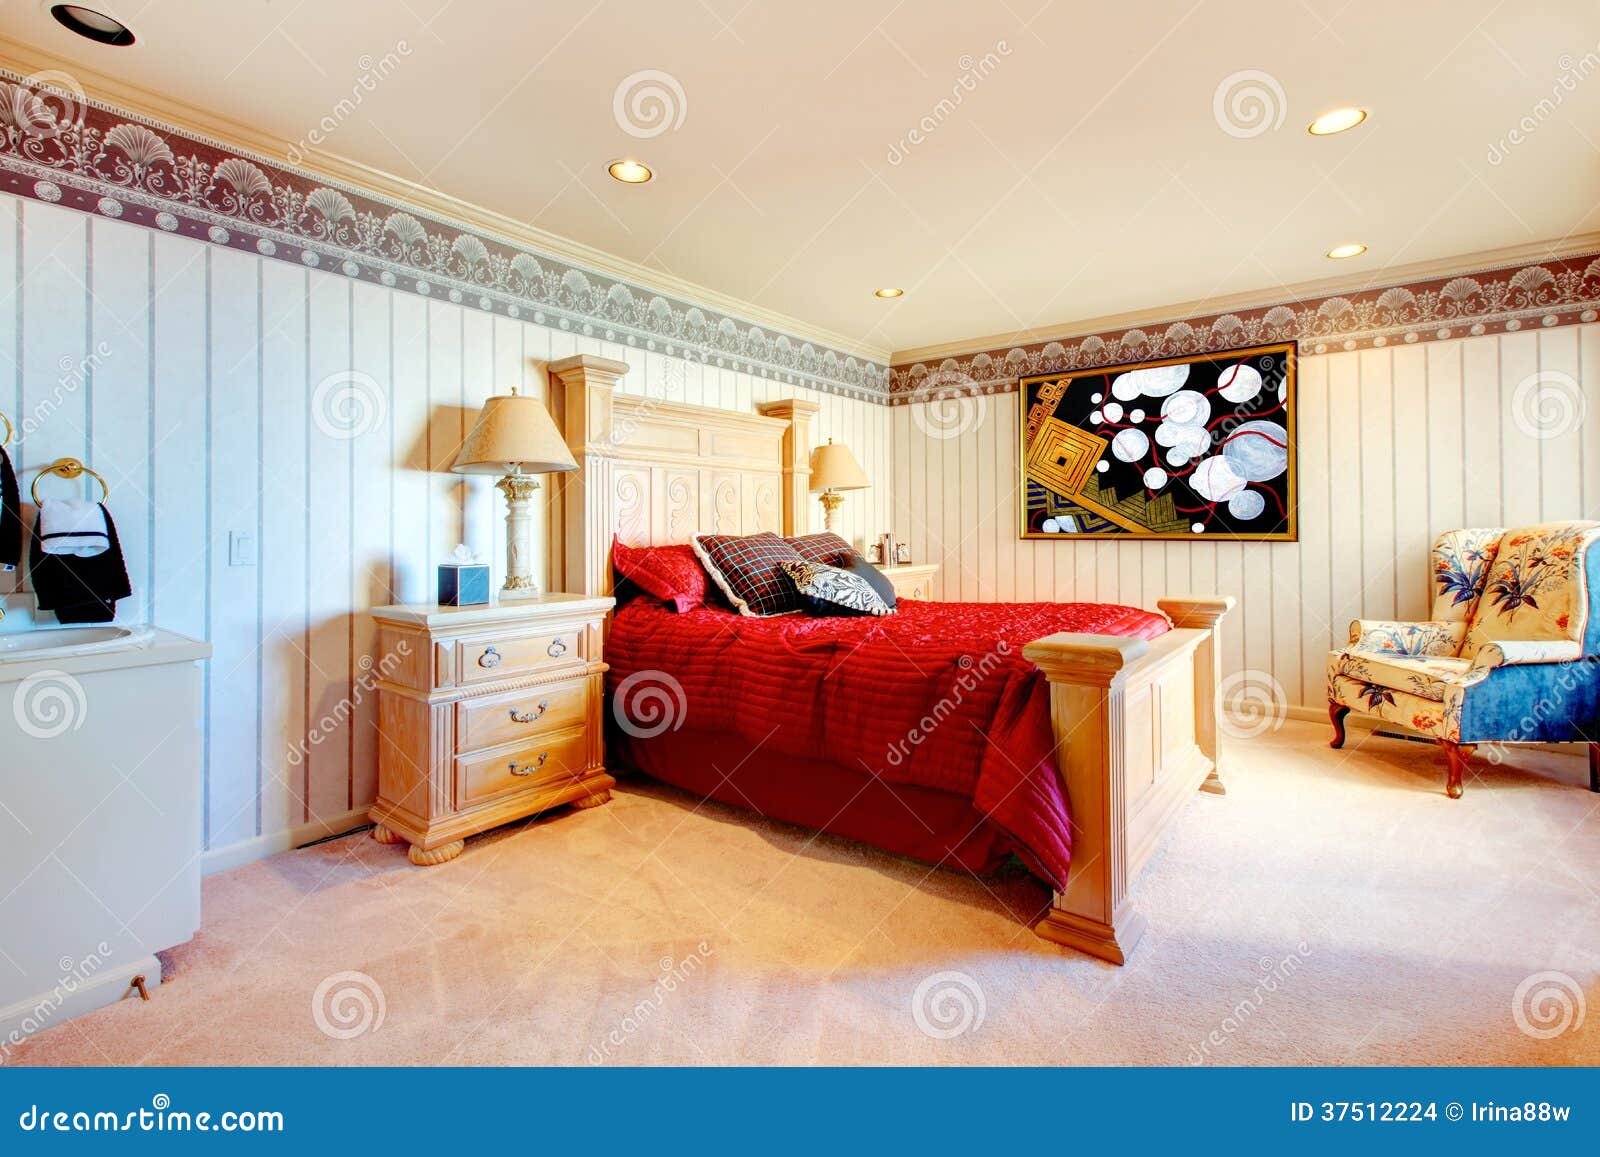 Elegant Bedroom With Rich Carved Furniture Stock Photo Image Of